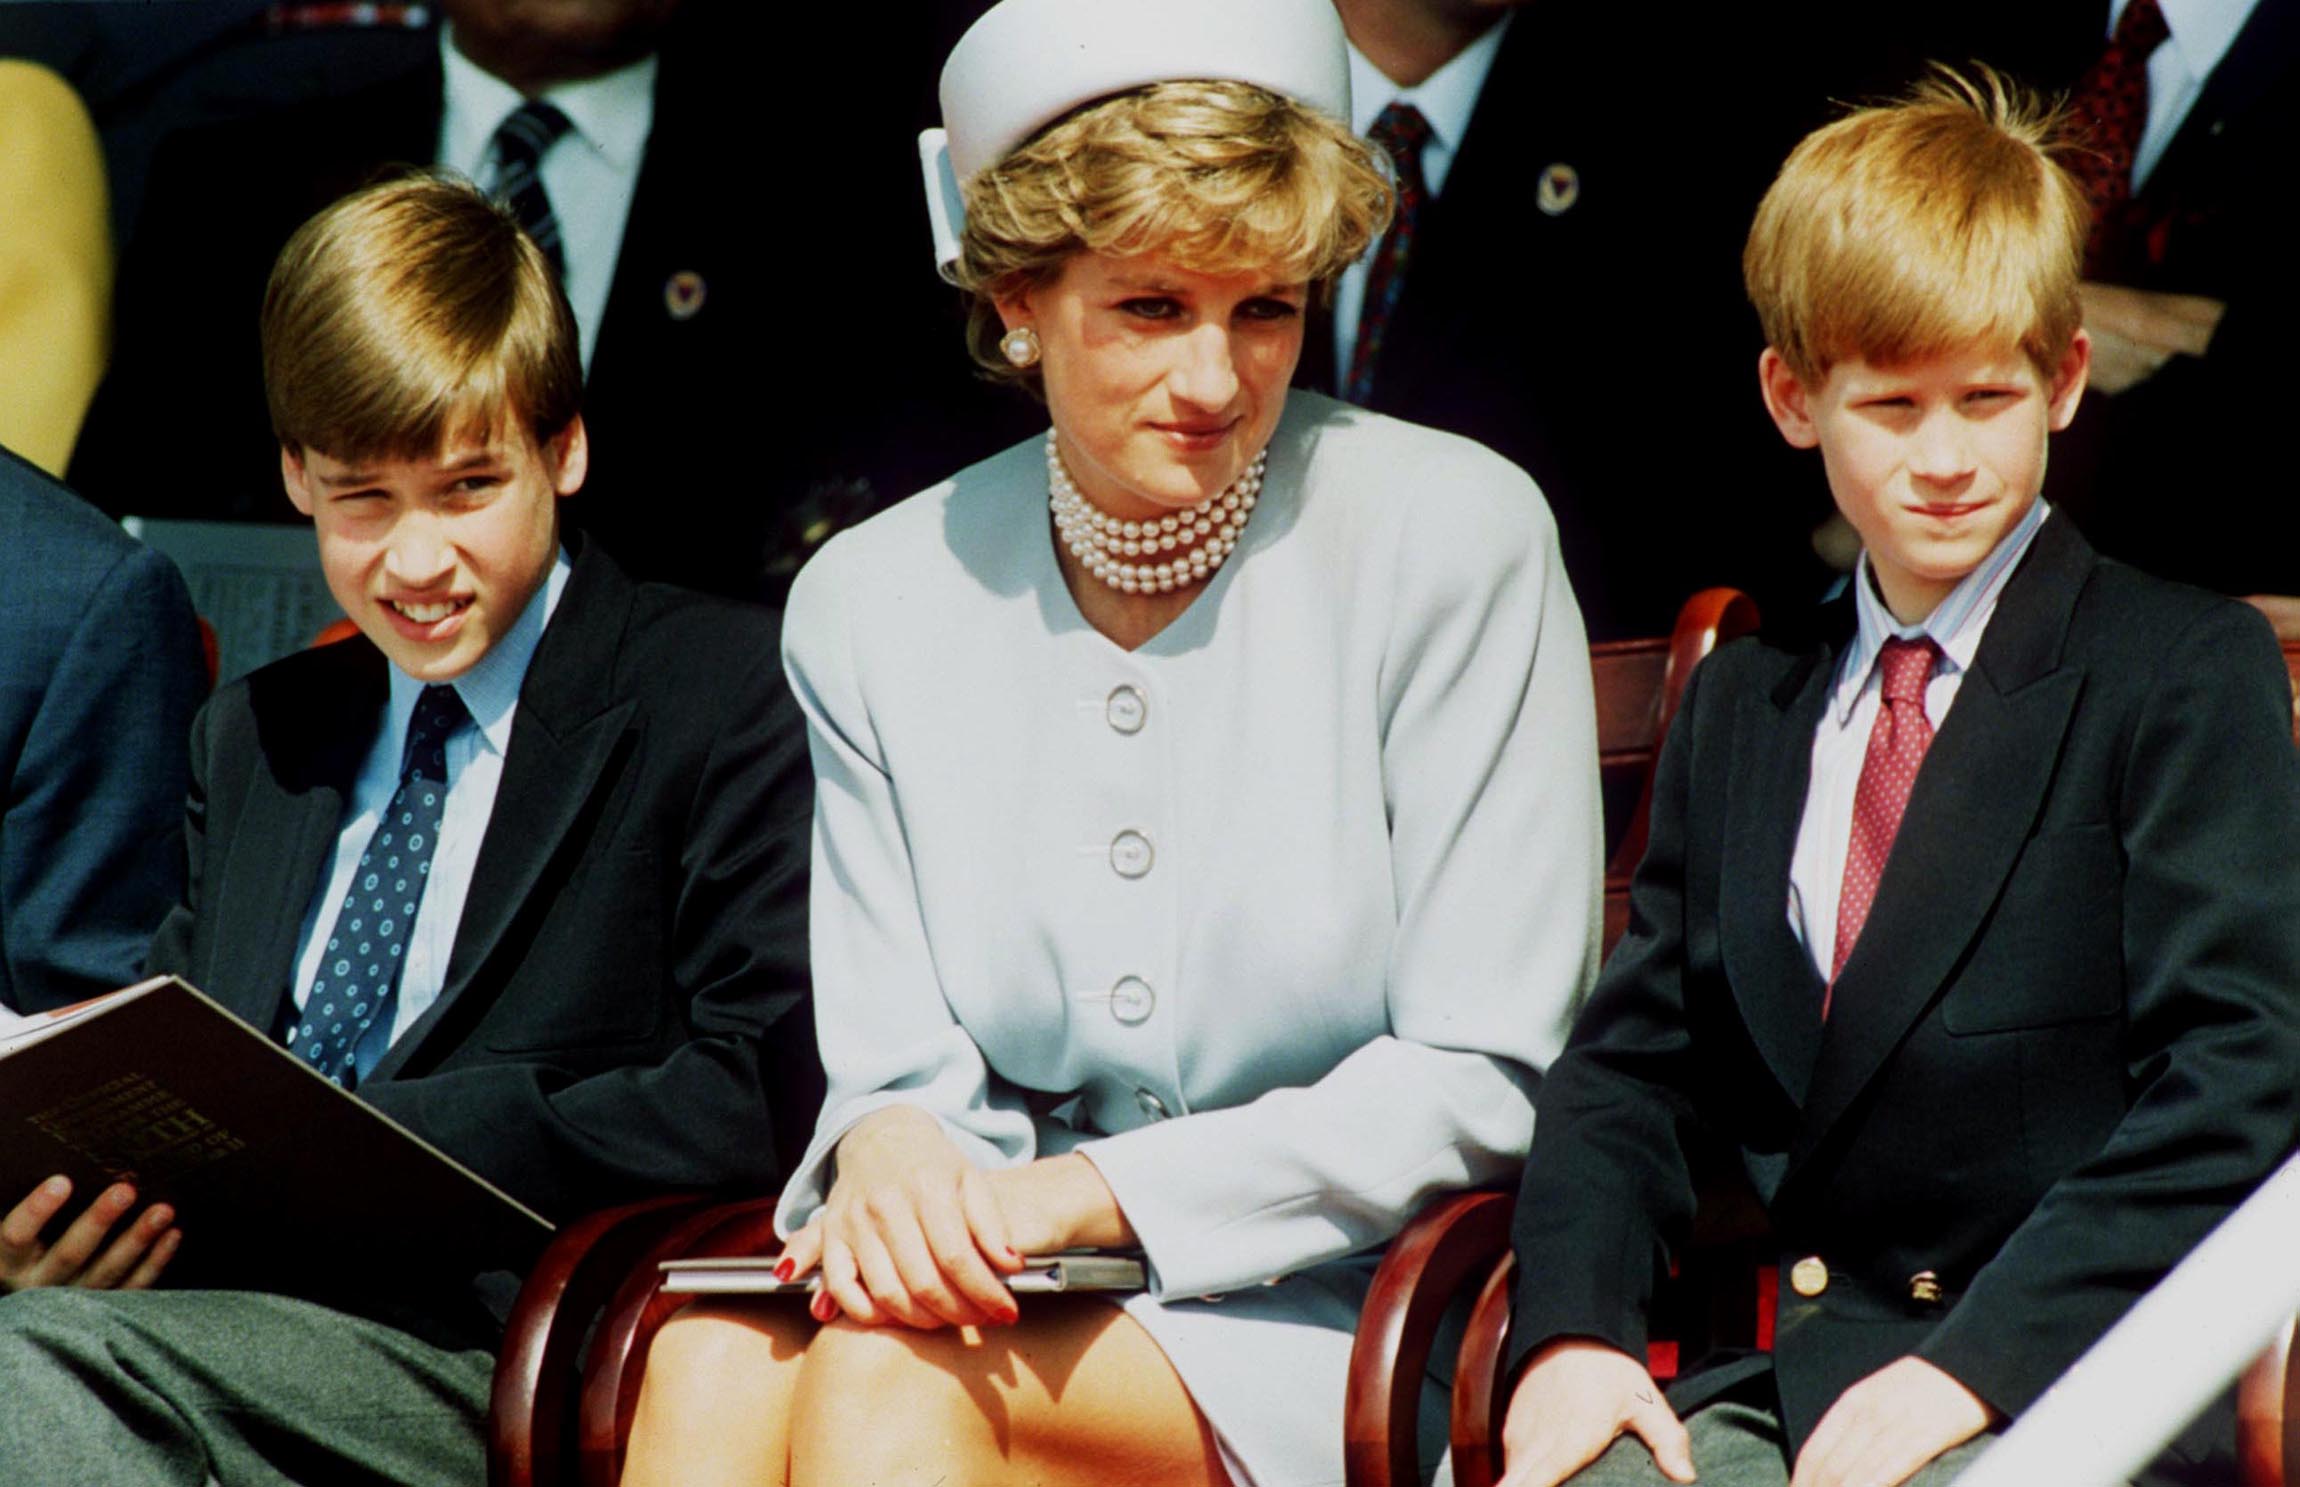 Princess Diana and her sons Prince William and Prince Harry | Photo: Getty Images